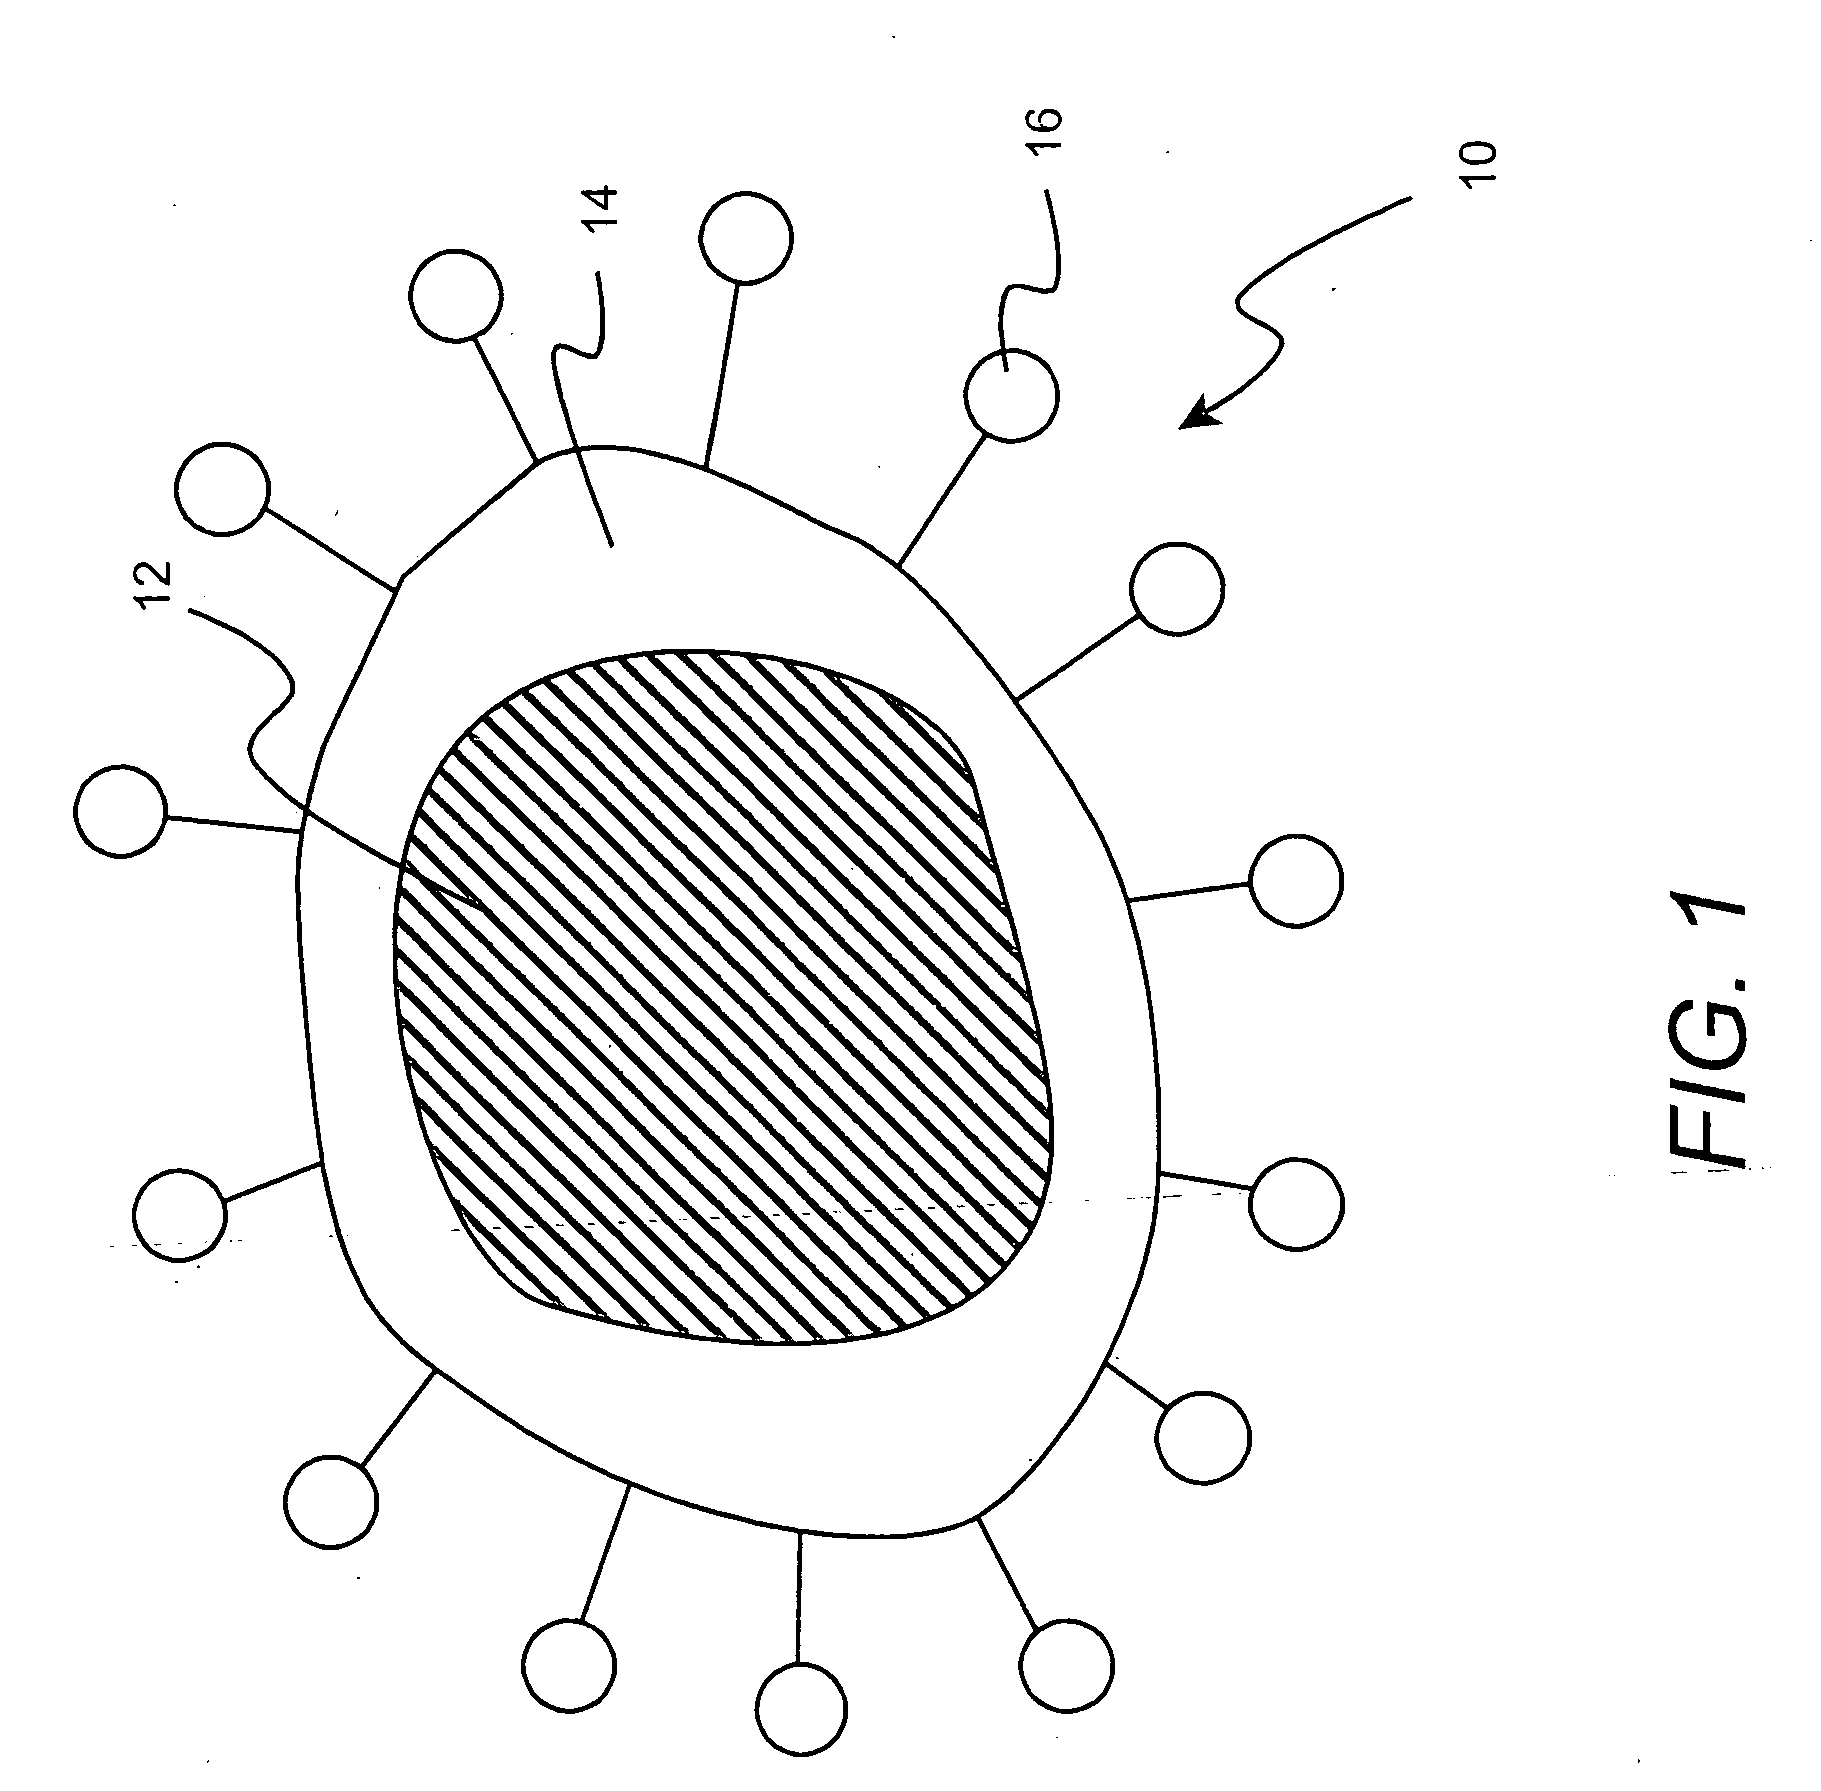 Method of making nanoparticles